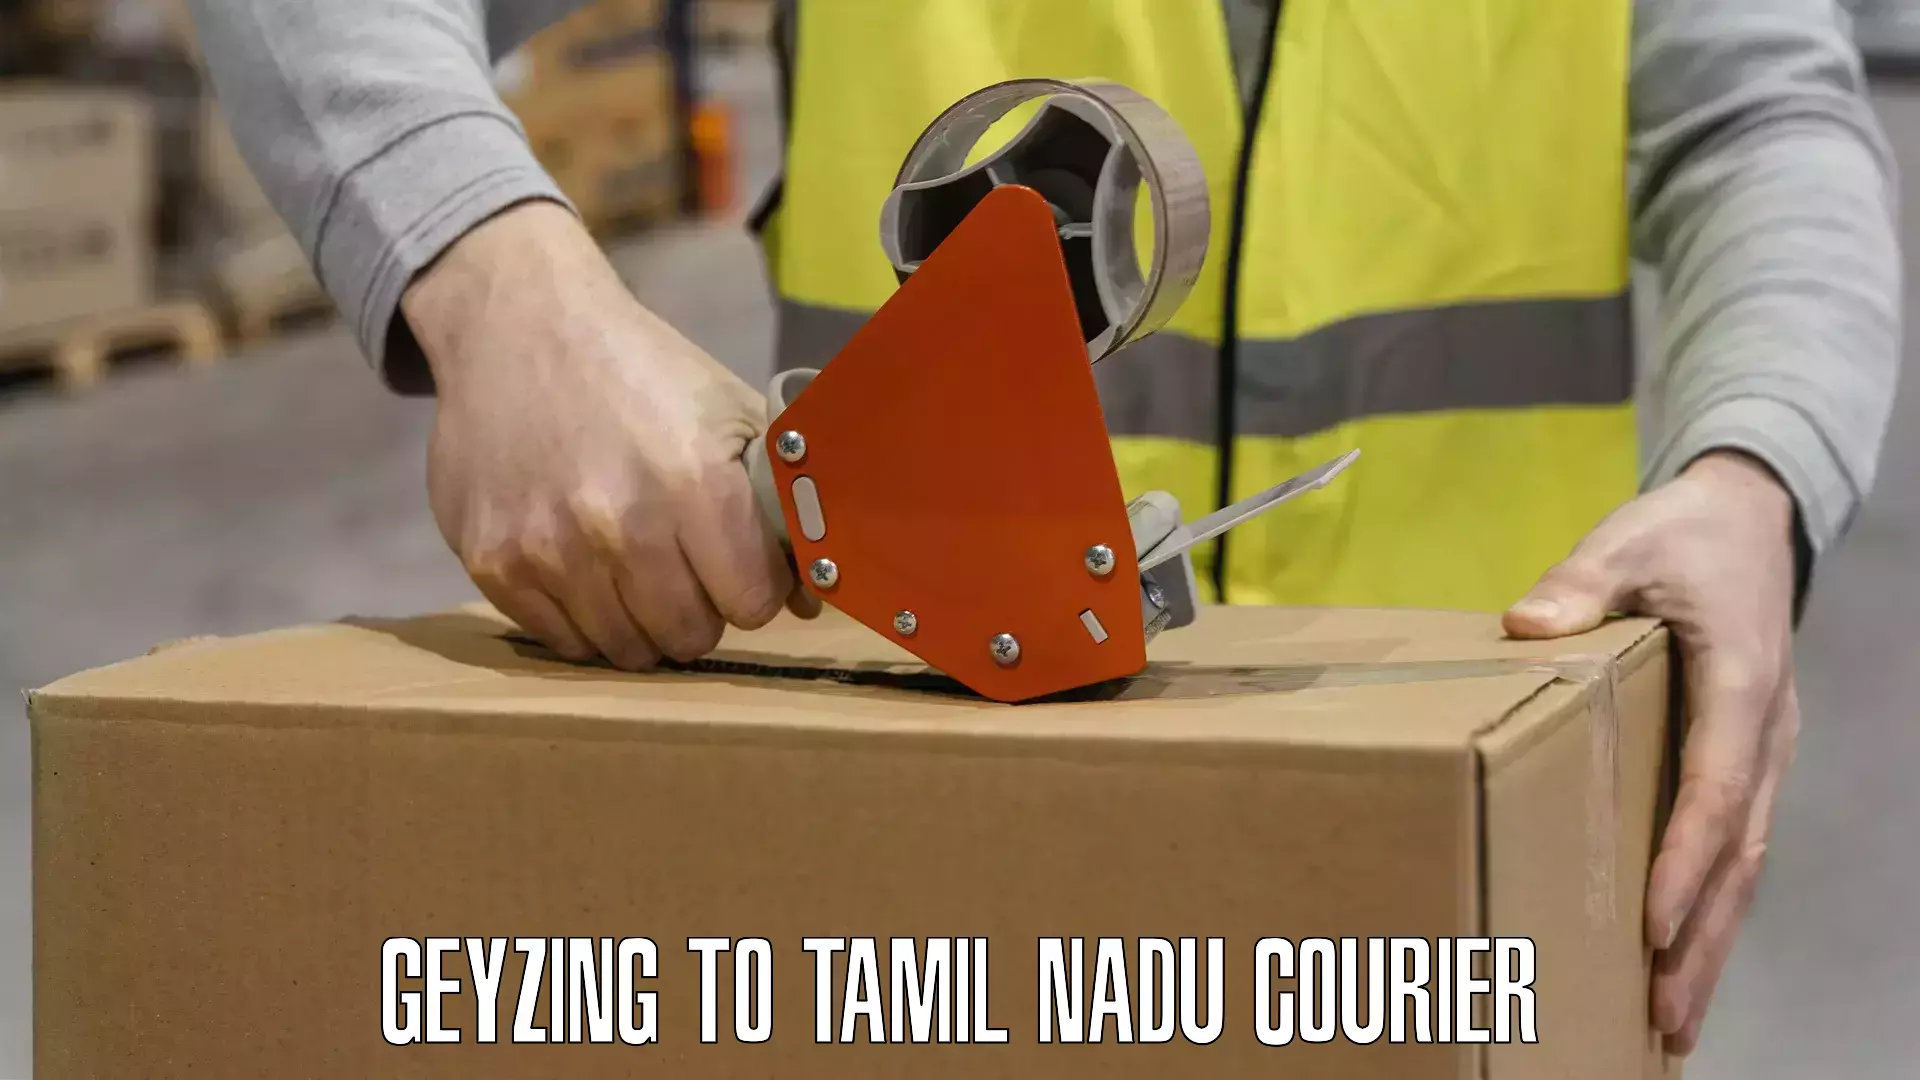 Speedy delivery service Geyzing to Dindigul